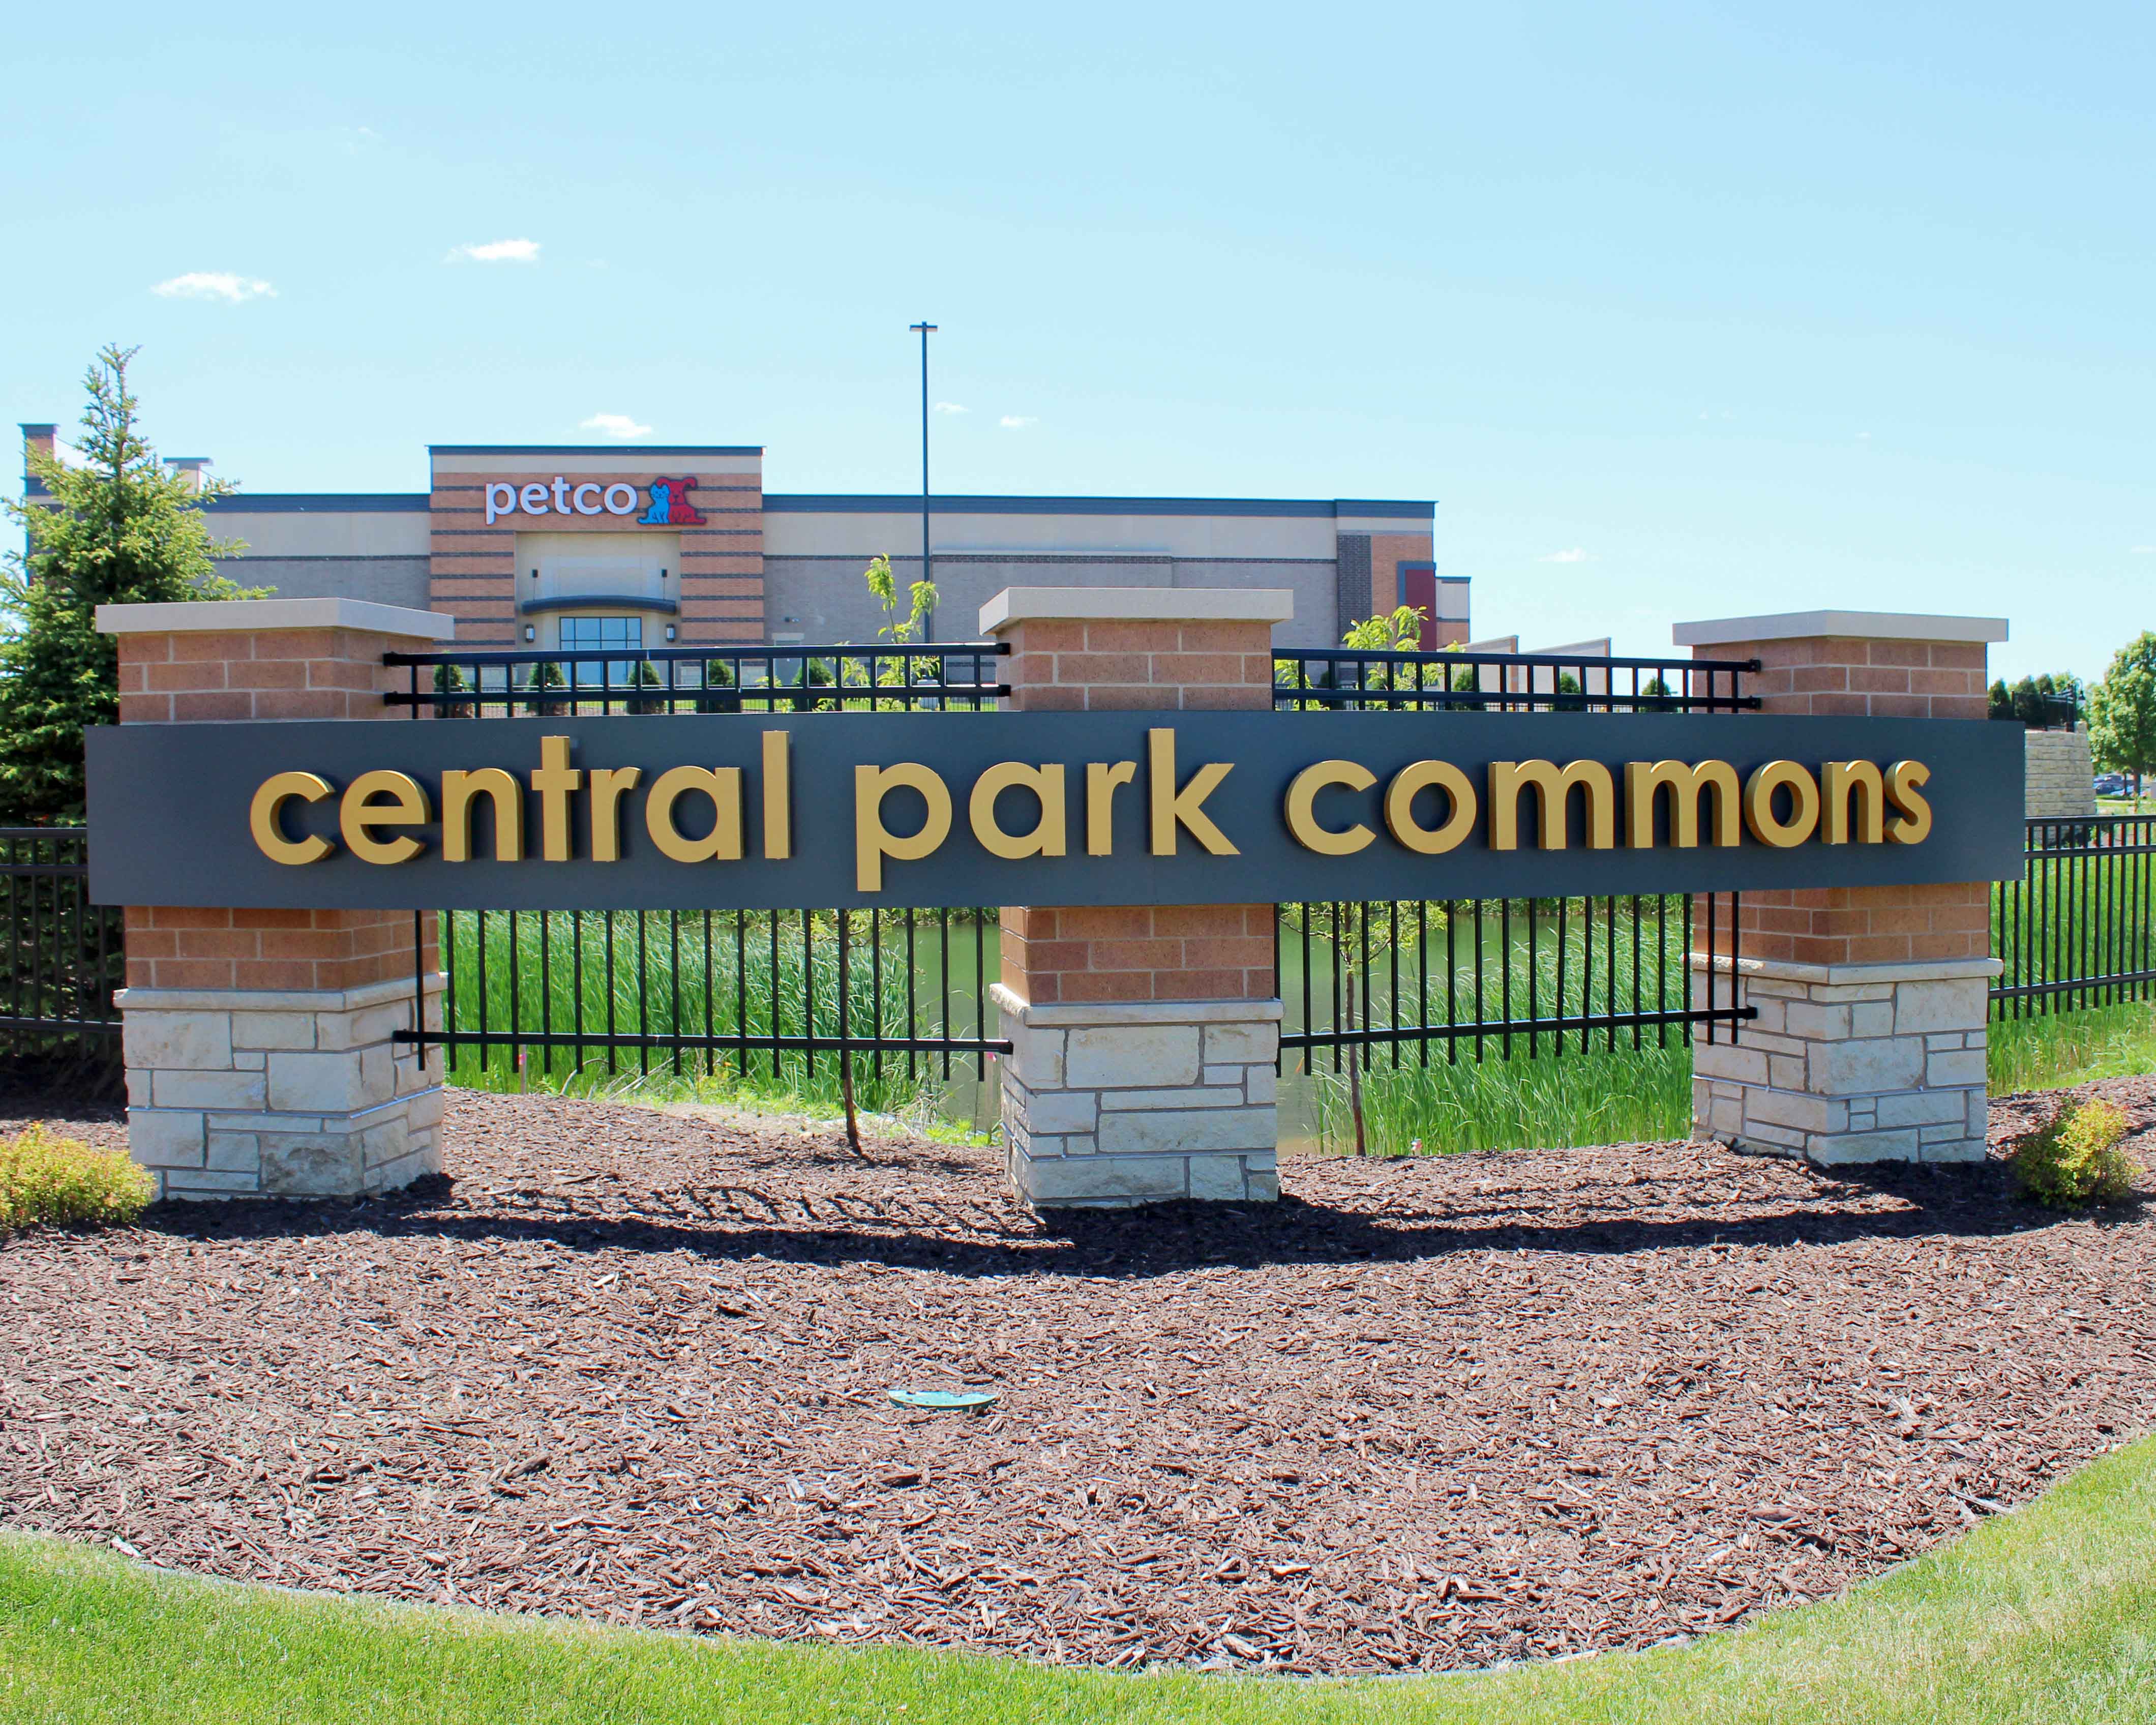 Central Park Commons main entrance sign, designed and built by Spectrum Signs